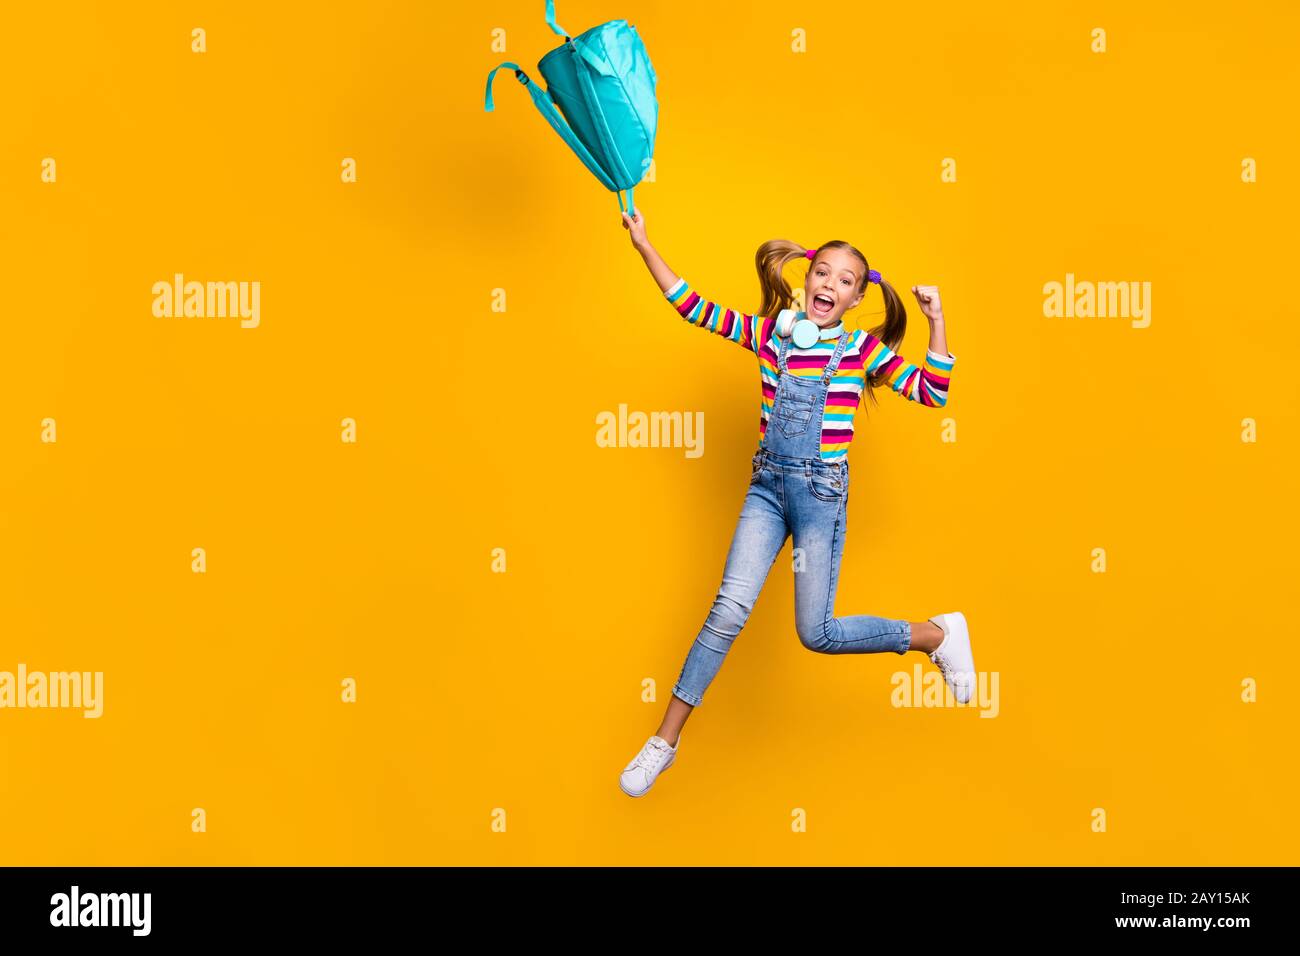 Yeah i pass exams. Ful size photo crazy energetic ecstatic schoolkid jump throw blue bag rucksack wear striped sweater denim casual style jeans Stock Photo